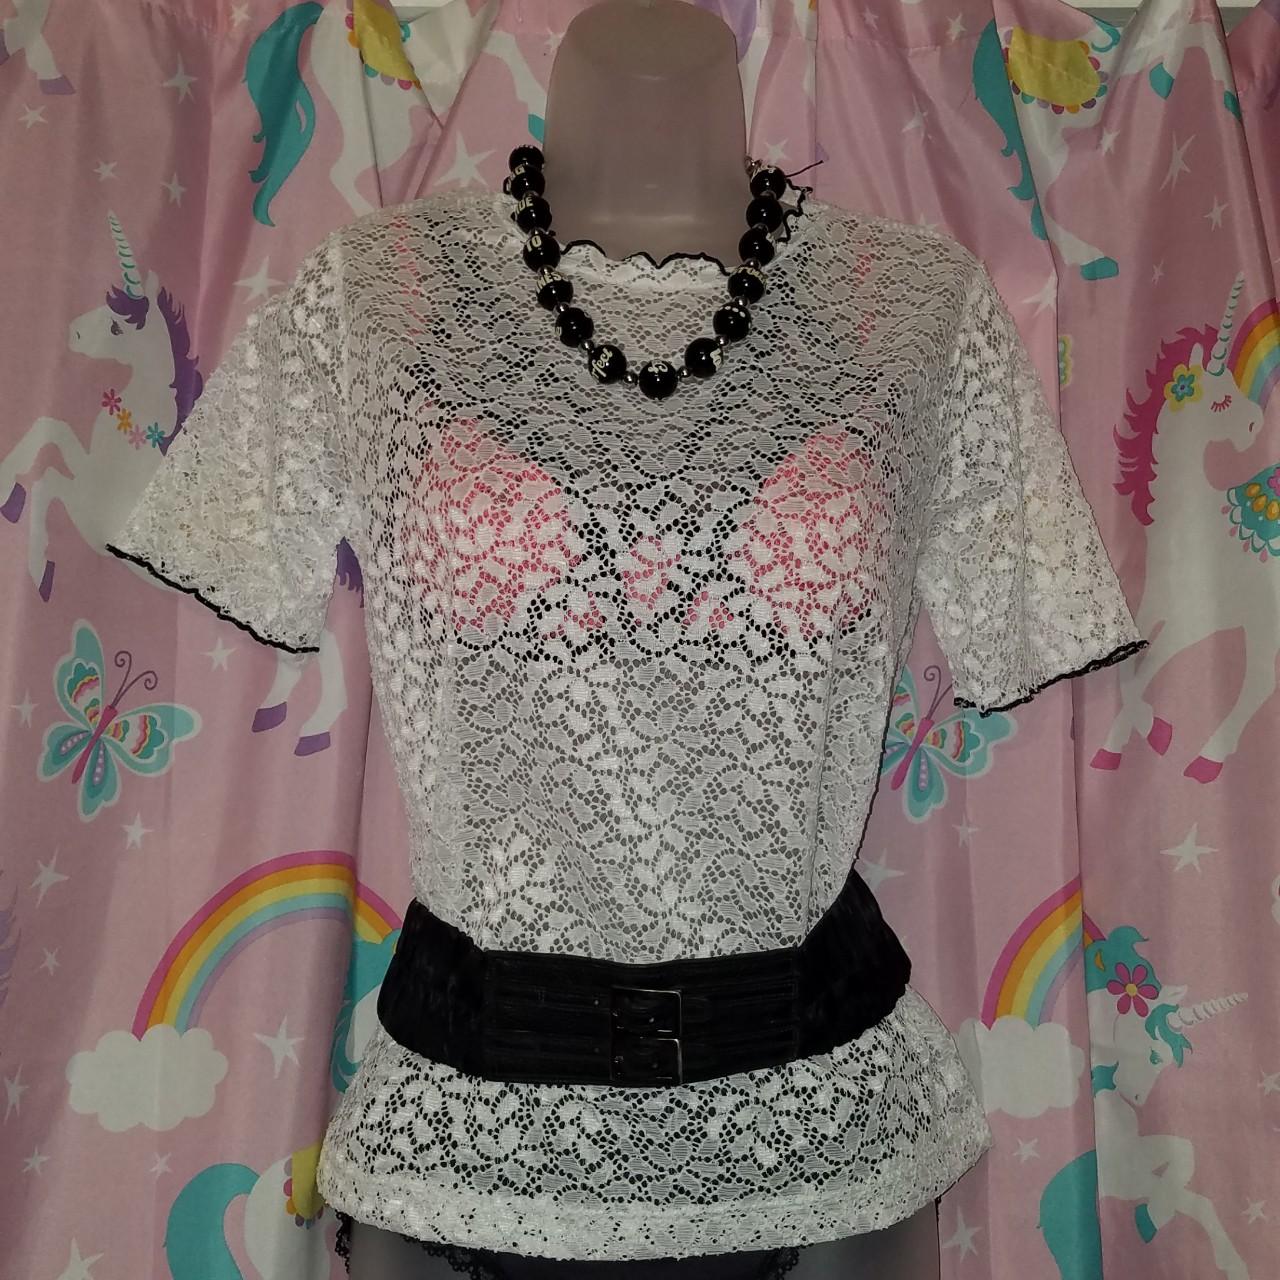 Product Image 1 - Zara Lace Blouse

This pretty blouse